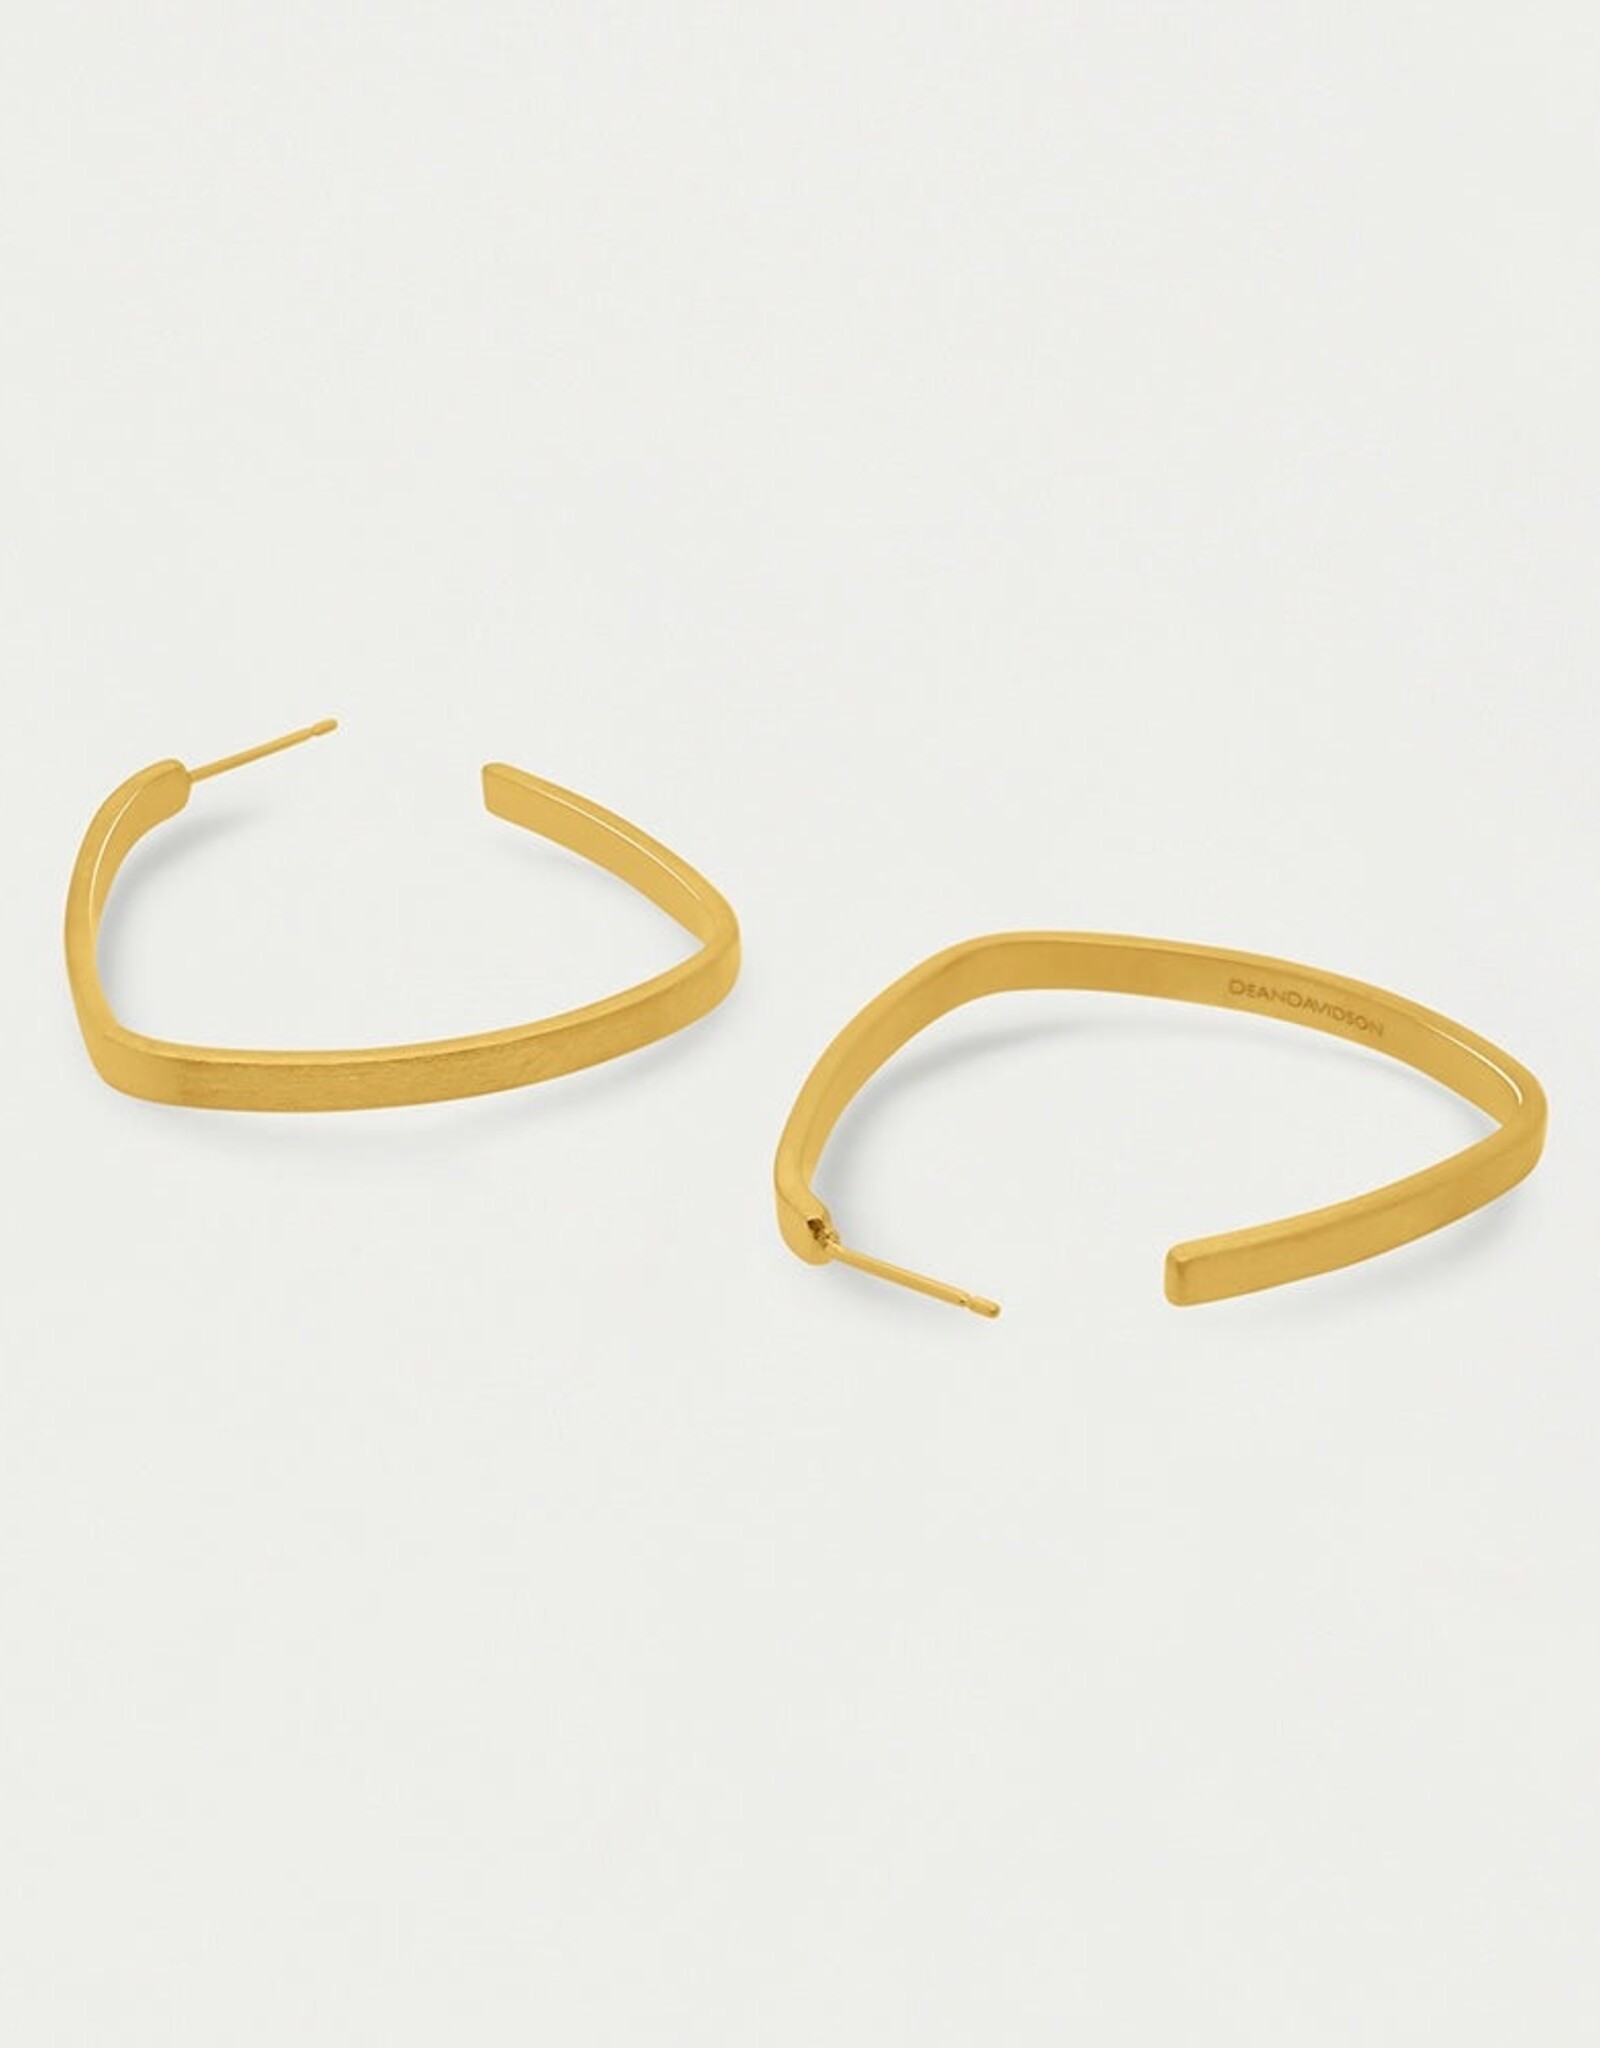 Dean Davidson Small Square Hoops, Gold